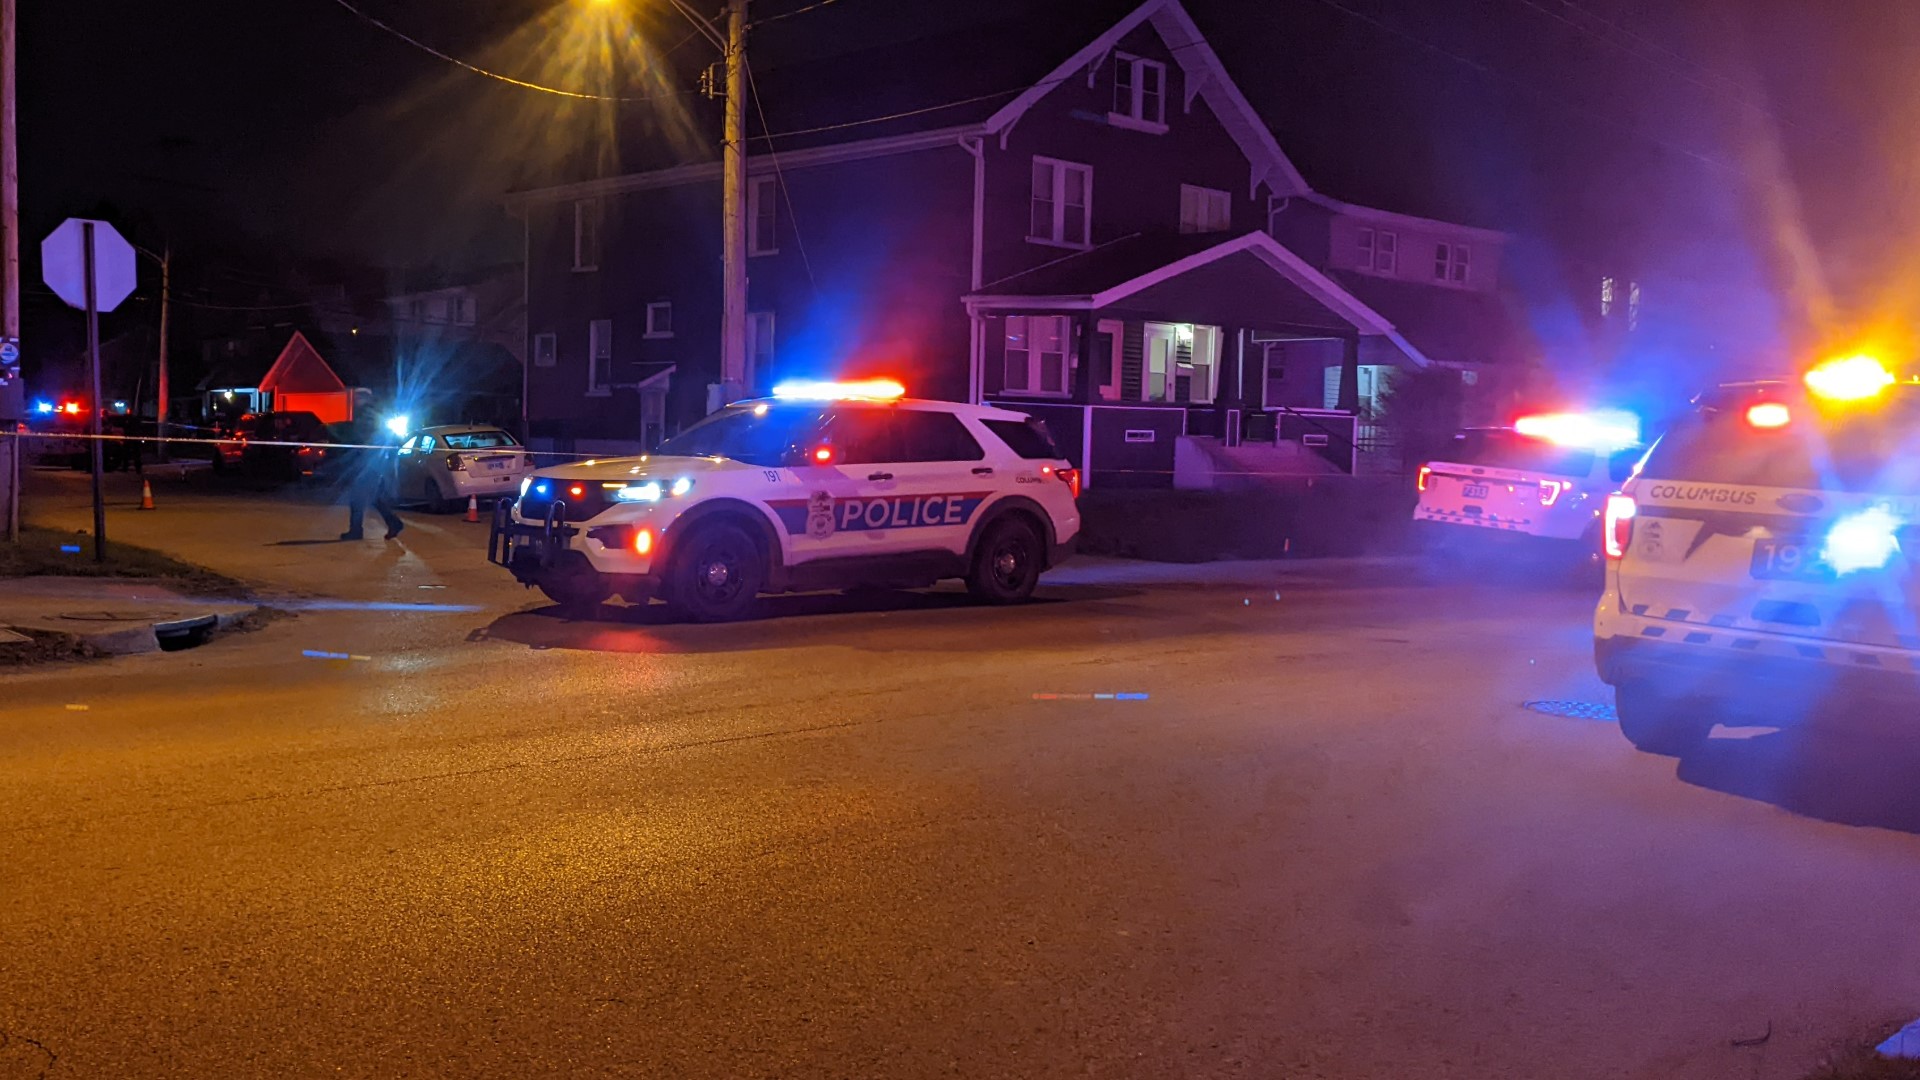 The Columbus Division of Police said the shooting happened in the 200 block of North Hague Avenue around 9 p.m.